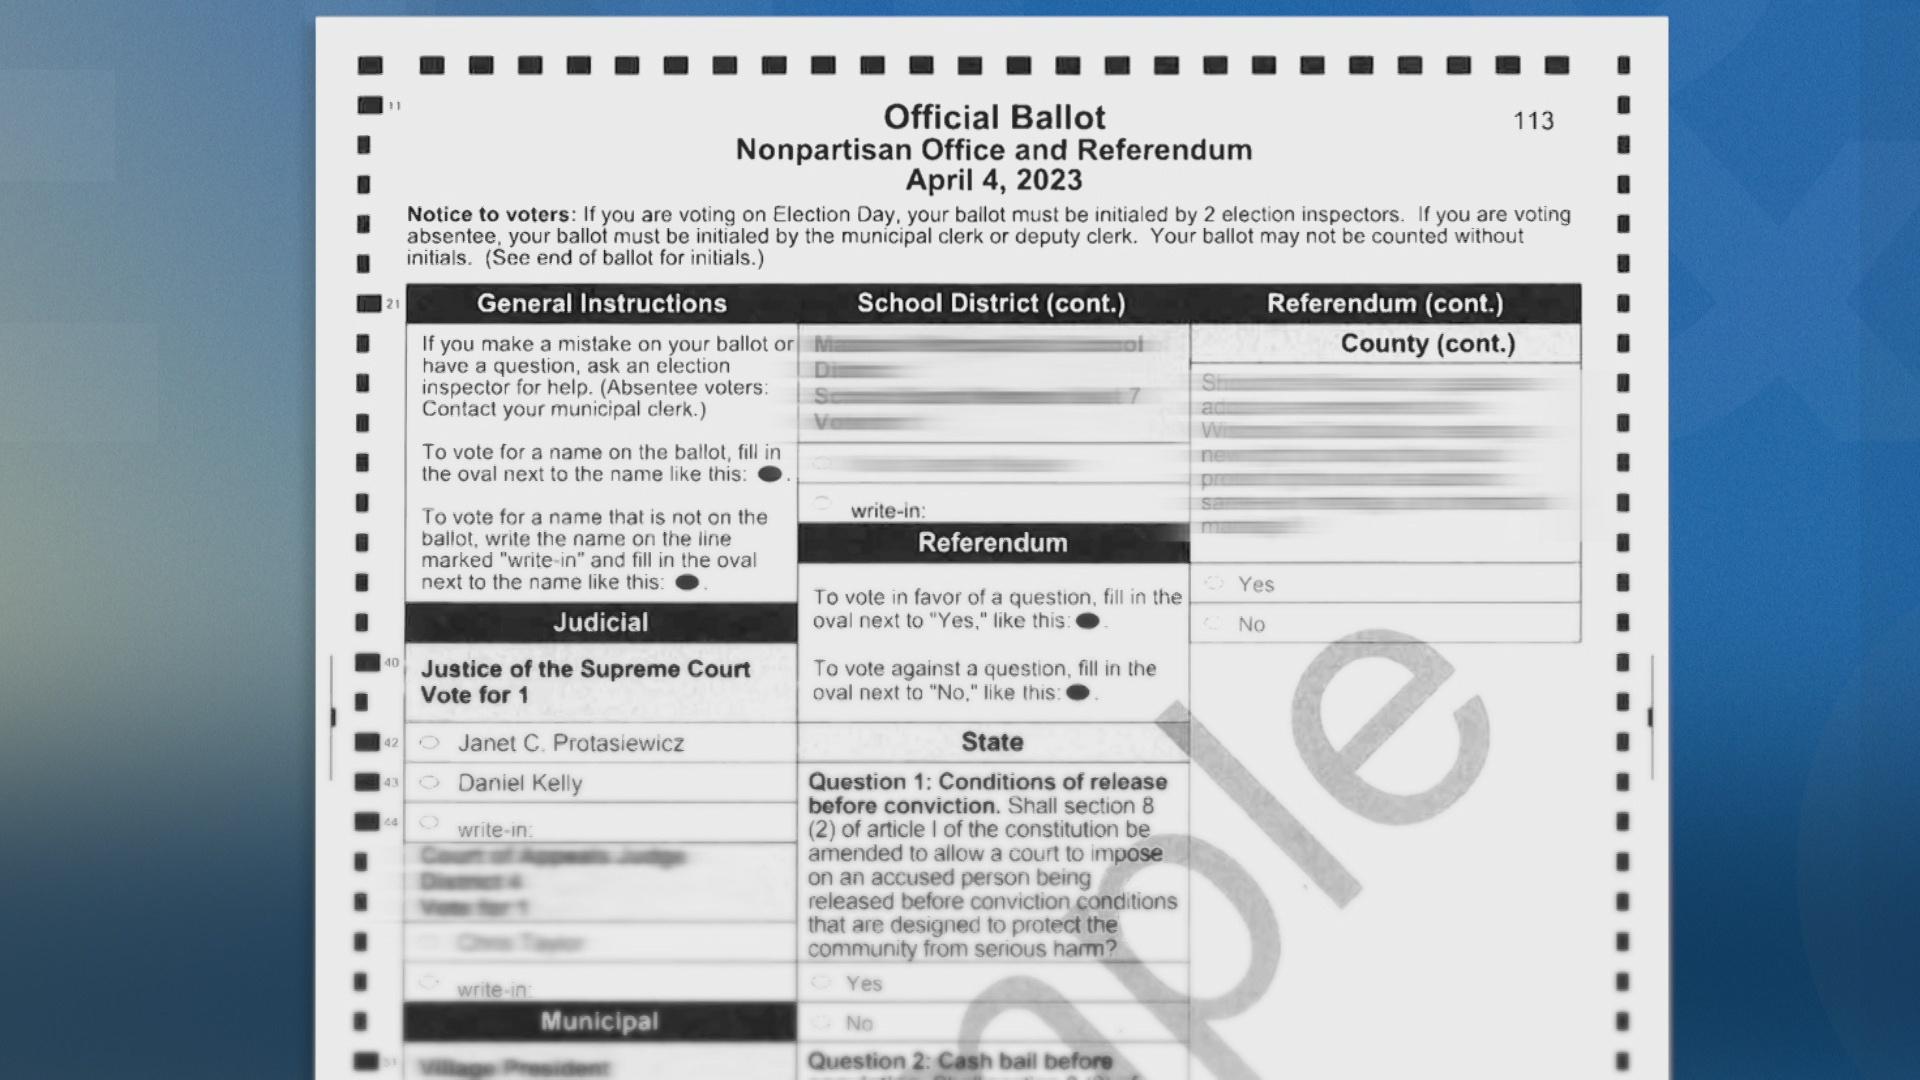 A still image from a video shows a sample ballot from Wisconsin's spring election on April 4, 2023.